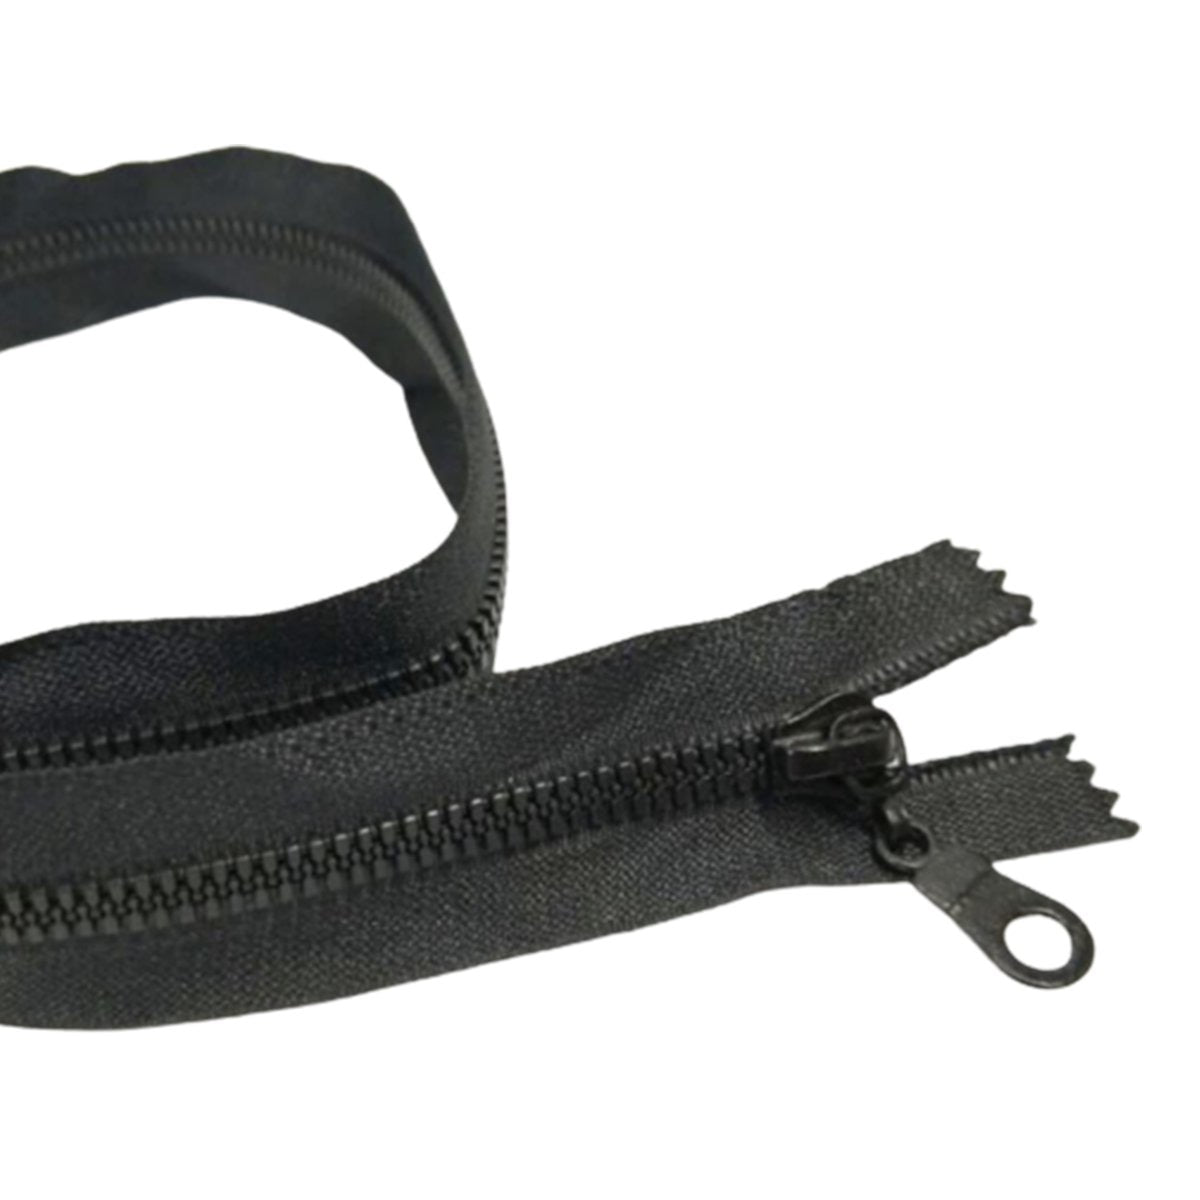 50Cm Plastic Zip Zipper Black White Open-Ended Open-End Sportwear Bags Sewing Accessories Clothing